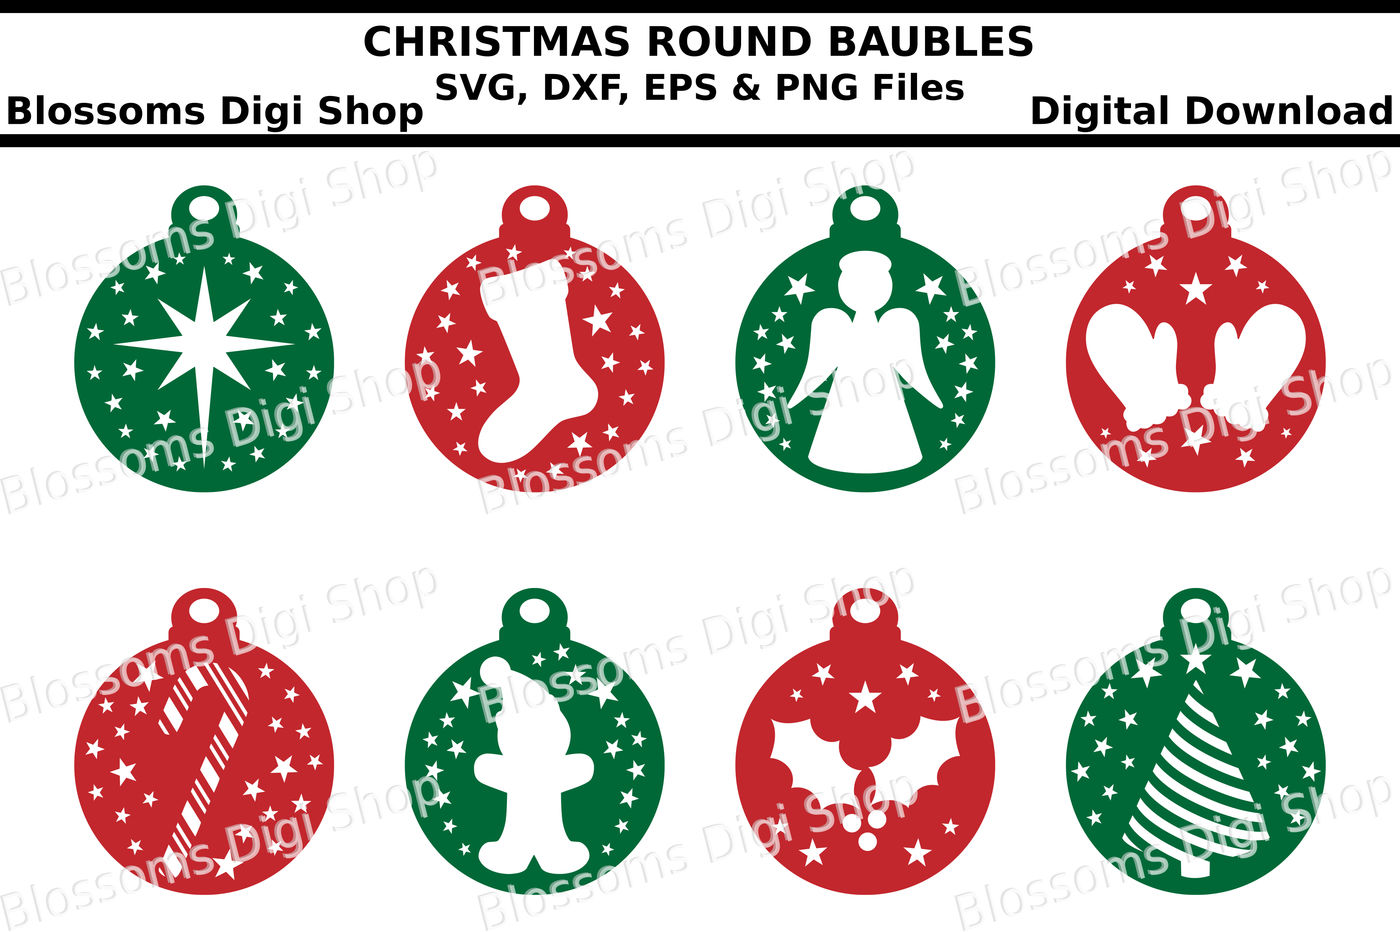 Christmas Baubles Svg Eps Dxf And Png Cut File By Blossoms Digi Shop Thehungryjpeg Com